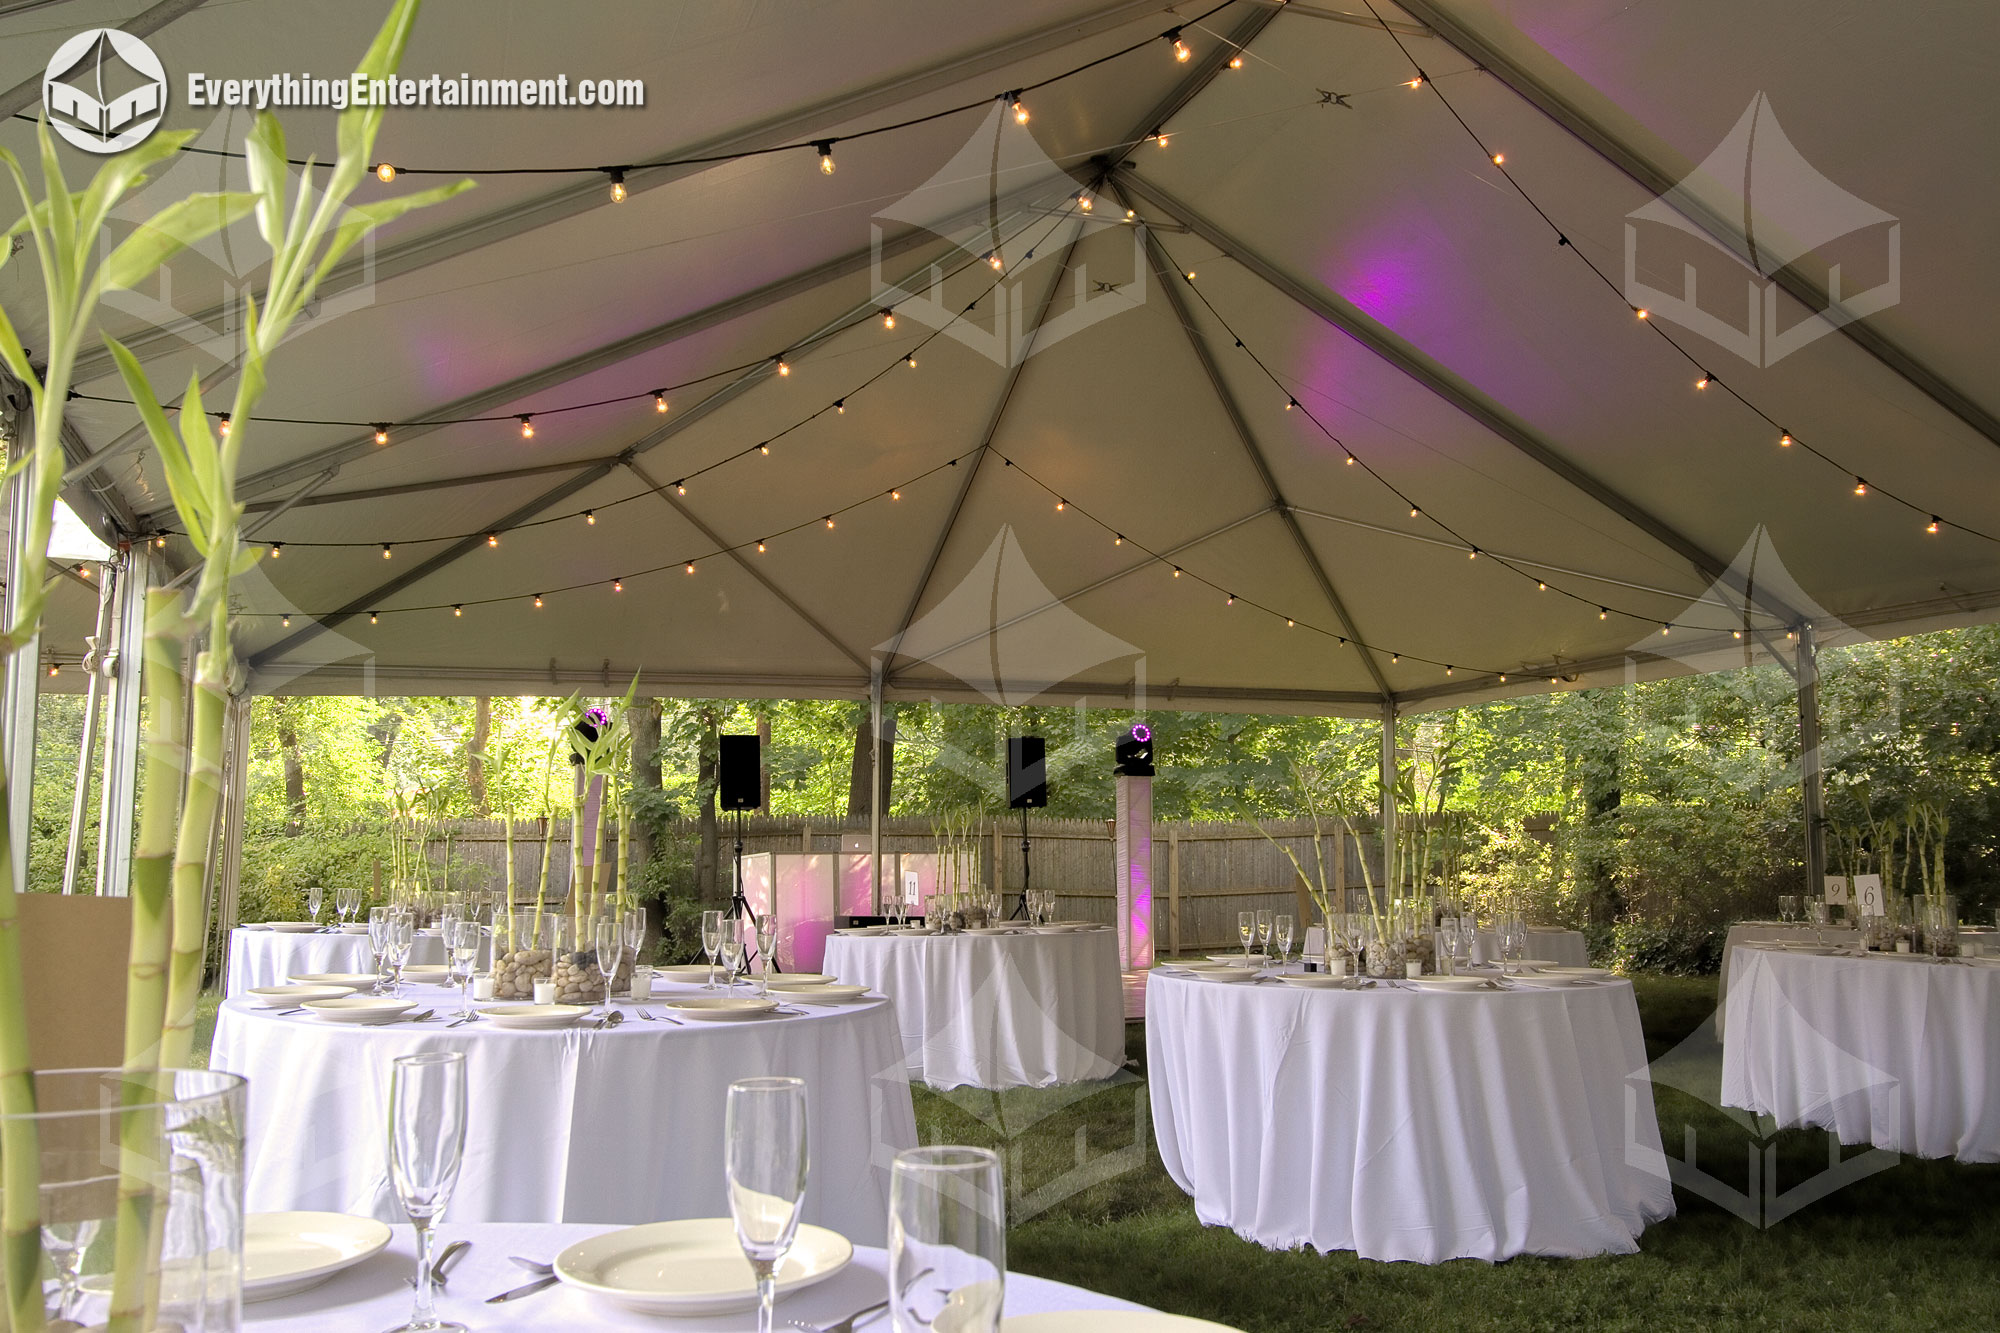 Interior of a frame tent with tables, chairs, and string lights